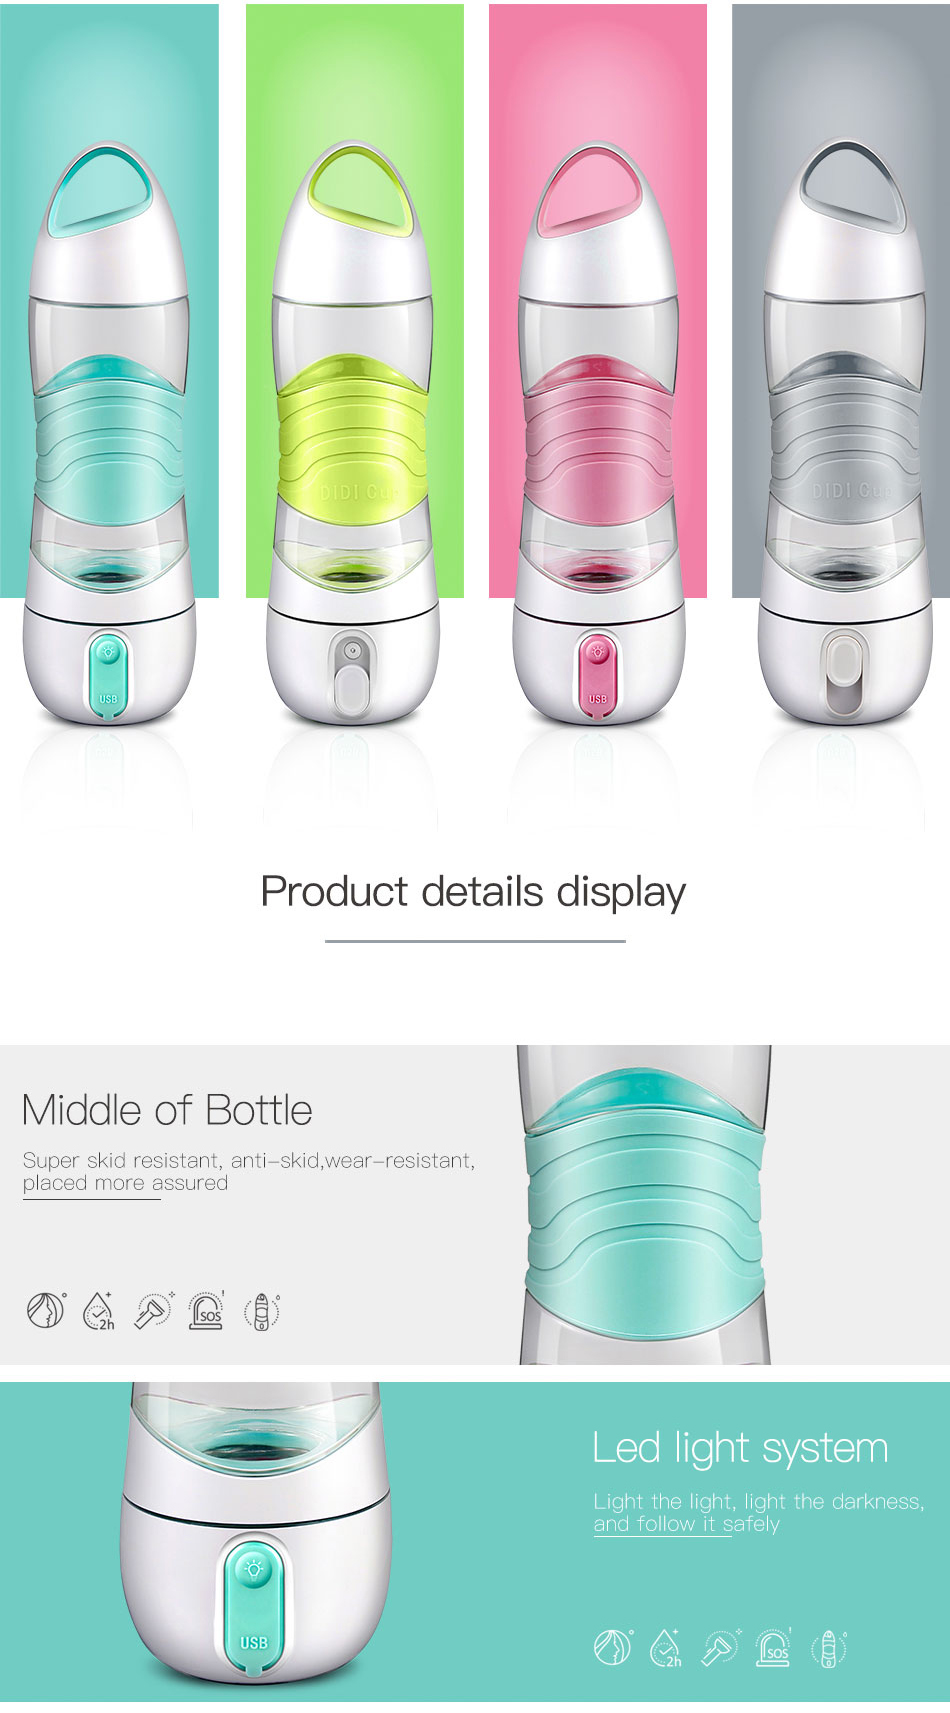 KCASA-DDH8 Portable USB Air Humidifier Spray 400ML Water Bottles Creative Outdoor Drinking Cup Sports Spray Bottle with Light 61